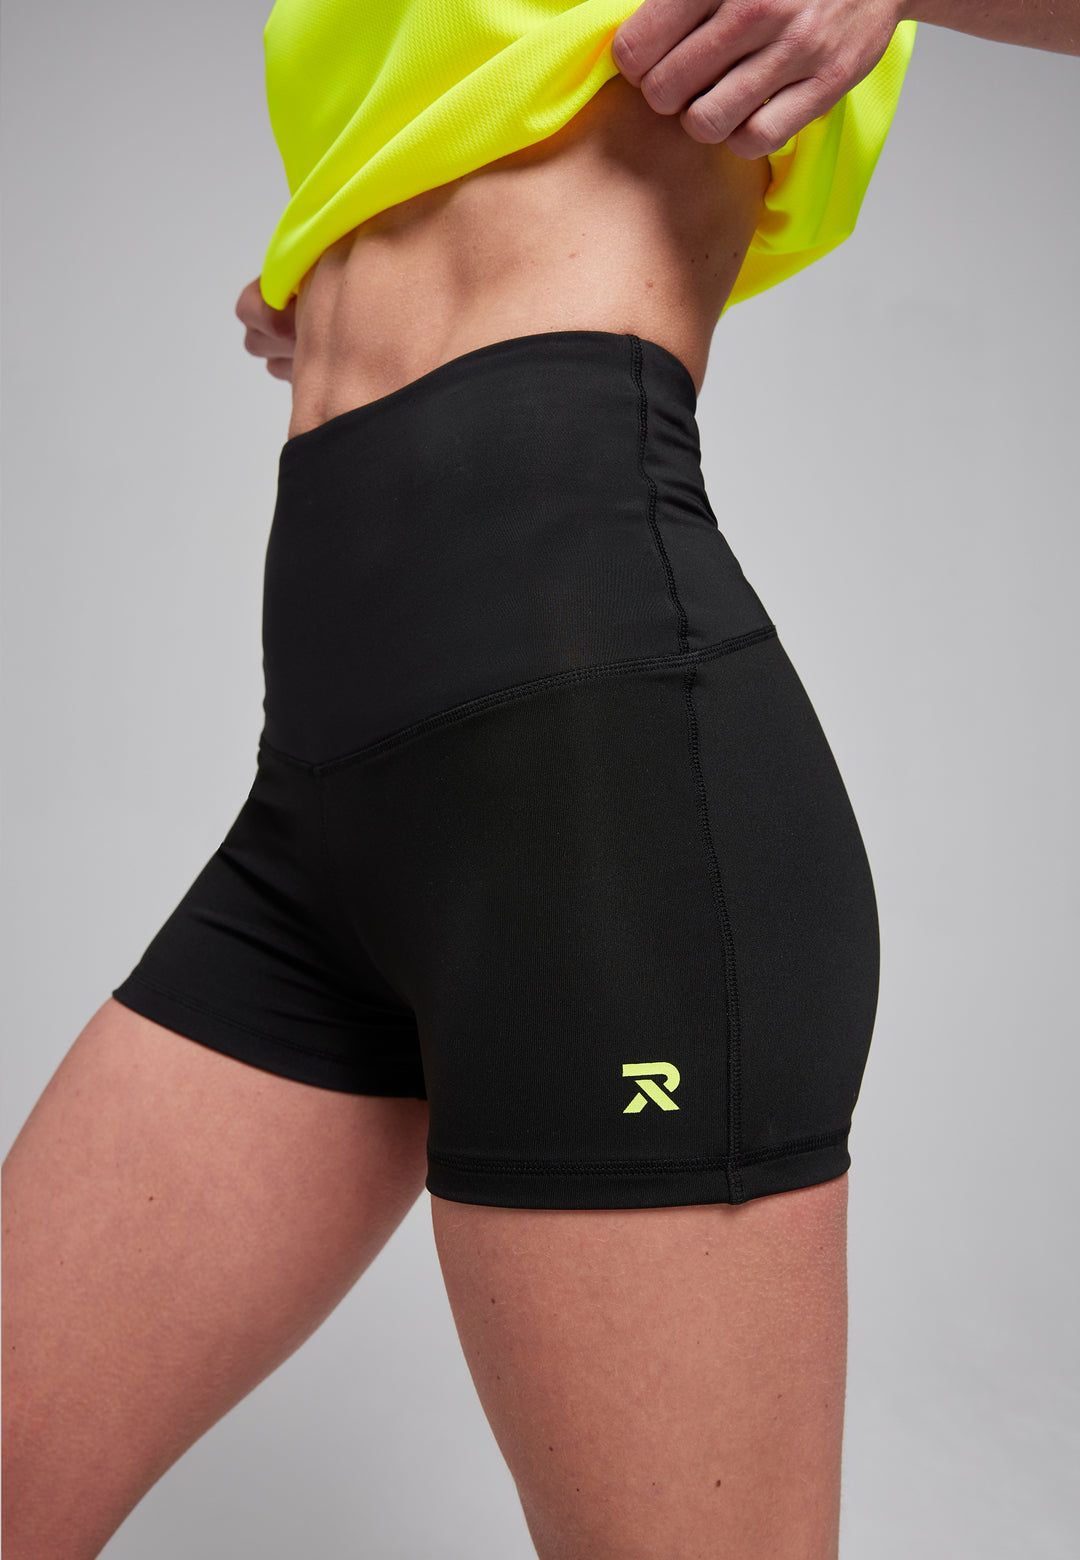 Women's shaping shorts Dry-Cool - sustainable